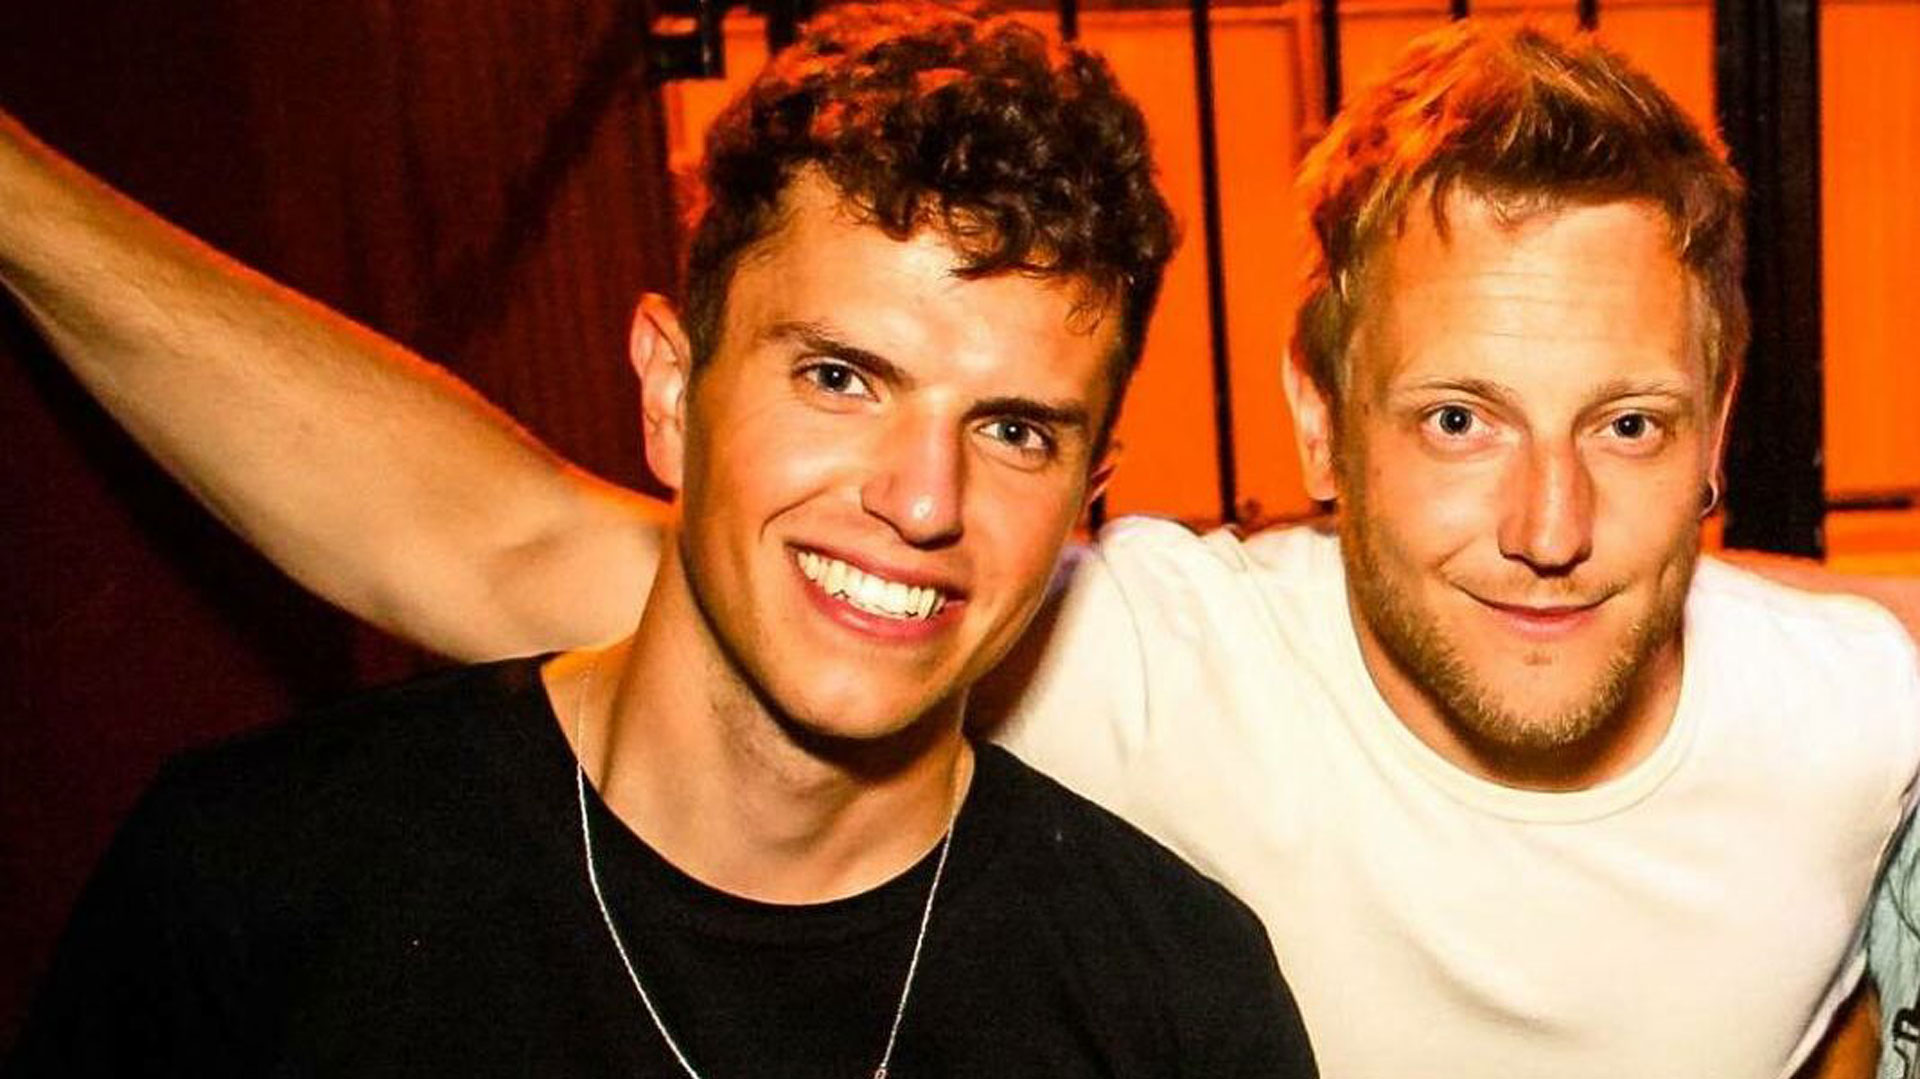 Damian Kerlin with his boyfriend Andrew who he met while out at gay bar Pulse